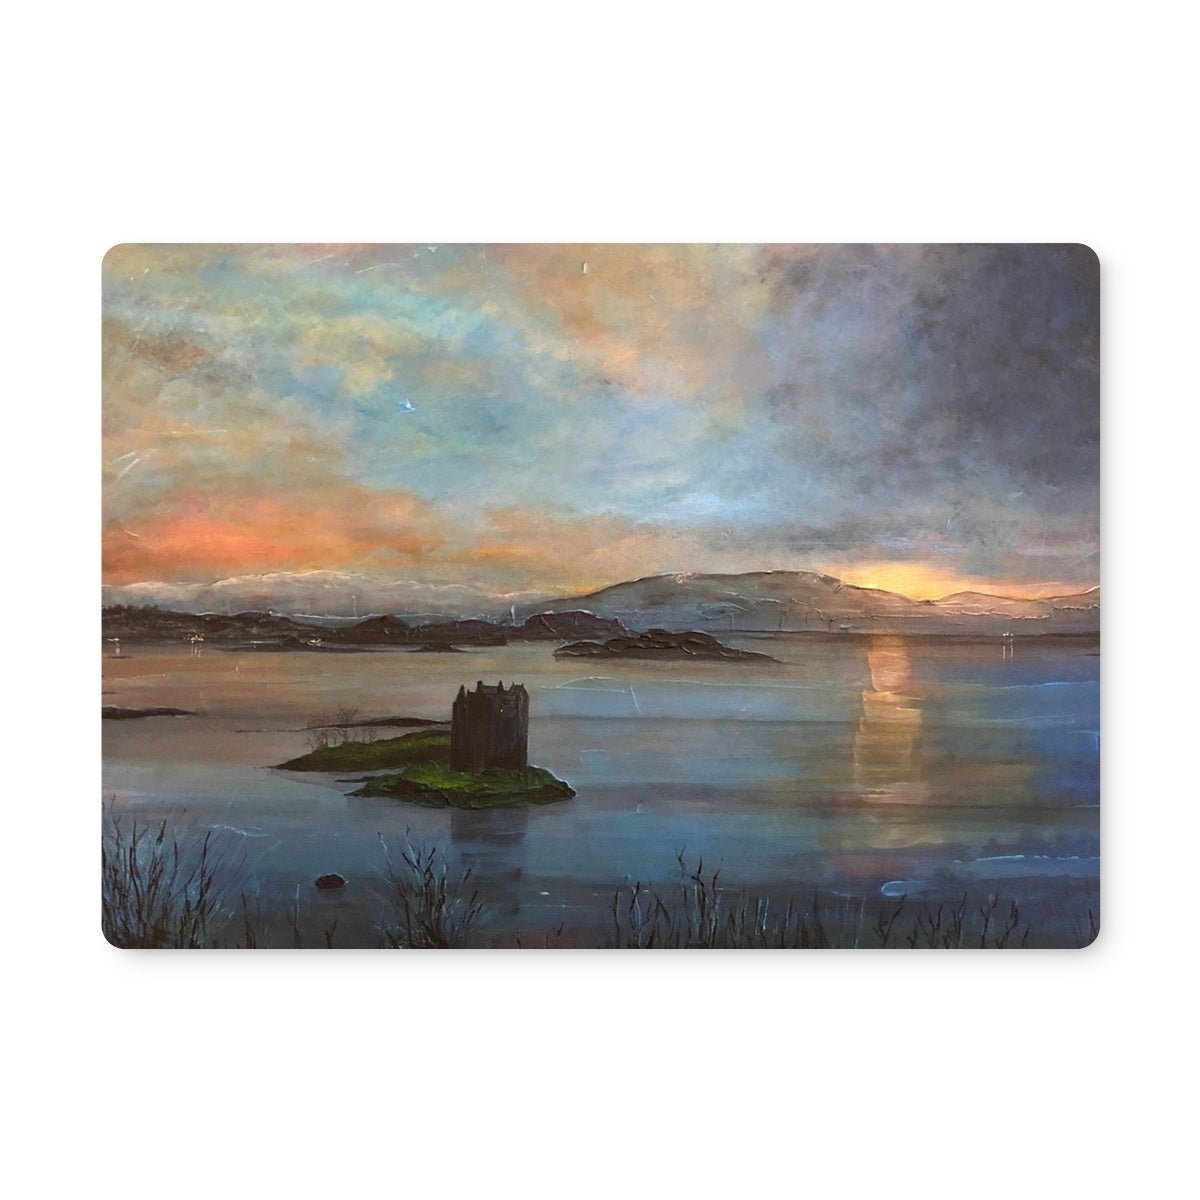 Castle Stalker Twilight Art Gifts Placemat-Placemats-Scottish Castles Art Gallery-6 Placemats-Paintings, Prints, Homeware, Art Gifts From Scotland By Scottish Artist Kevin Hunter